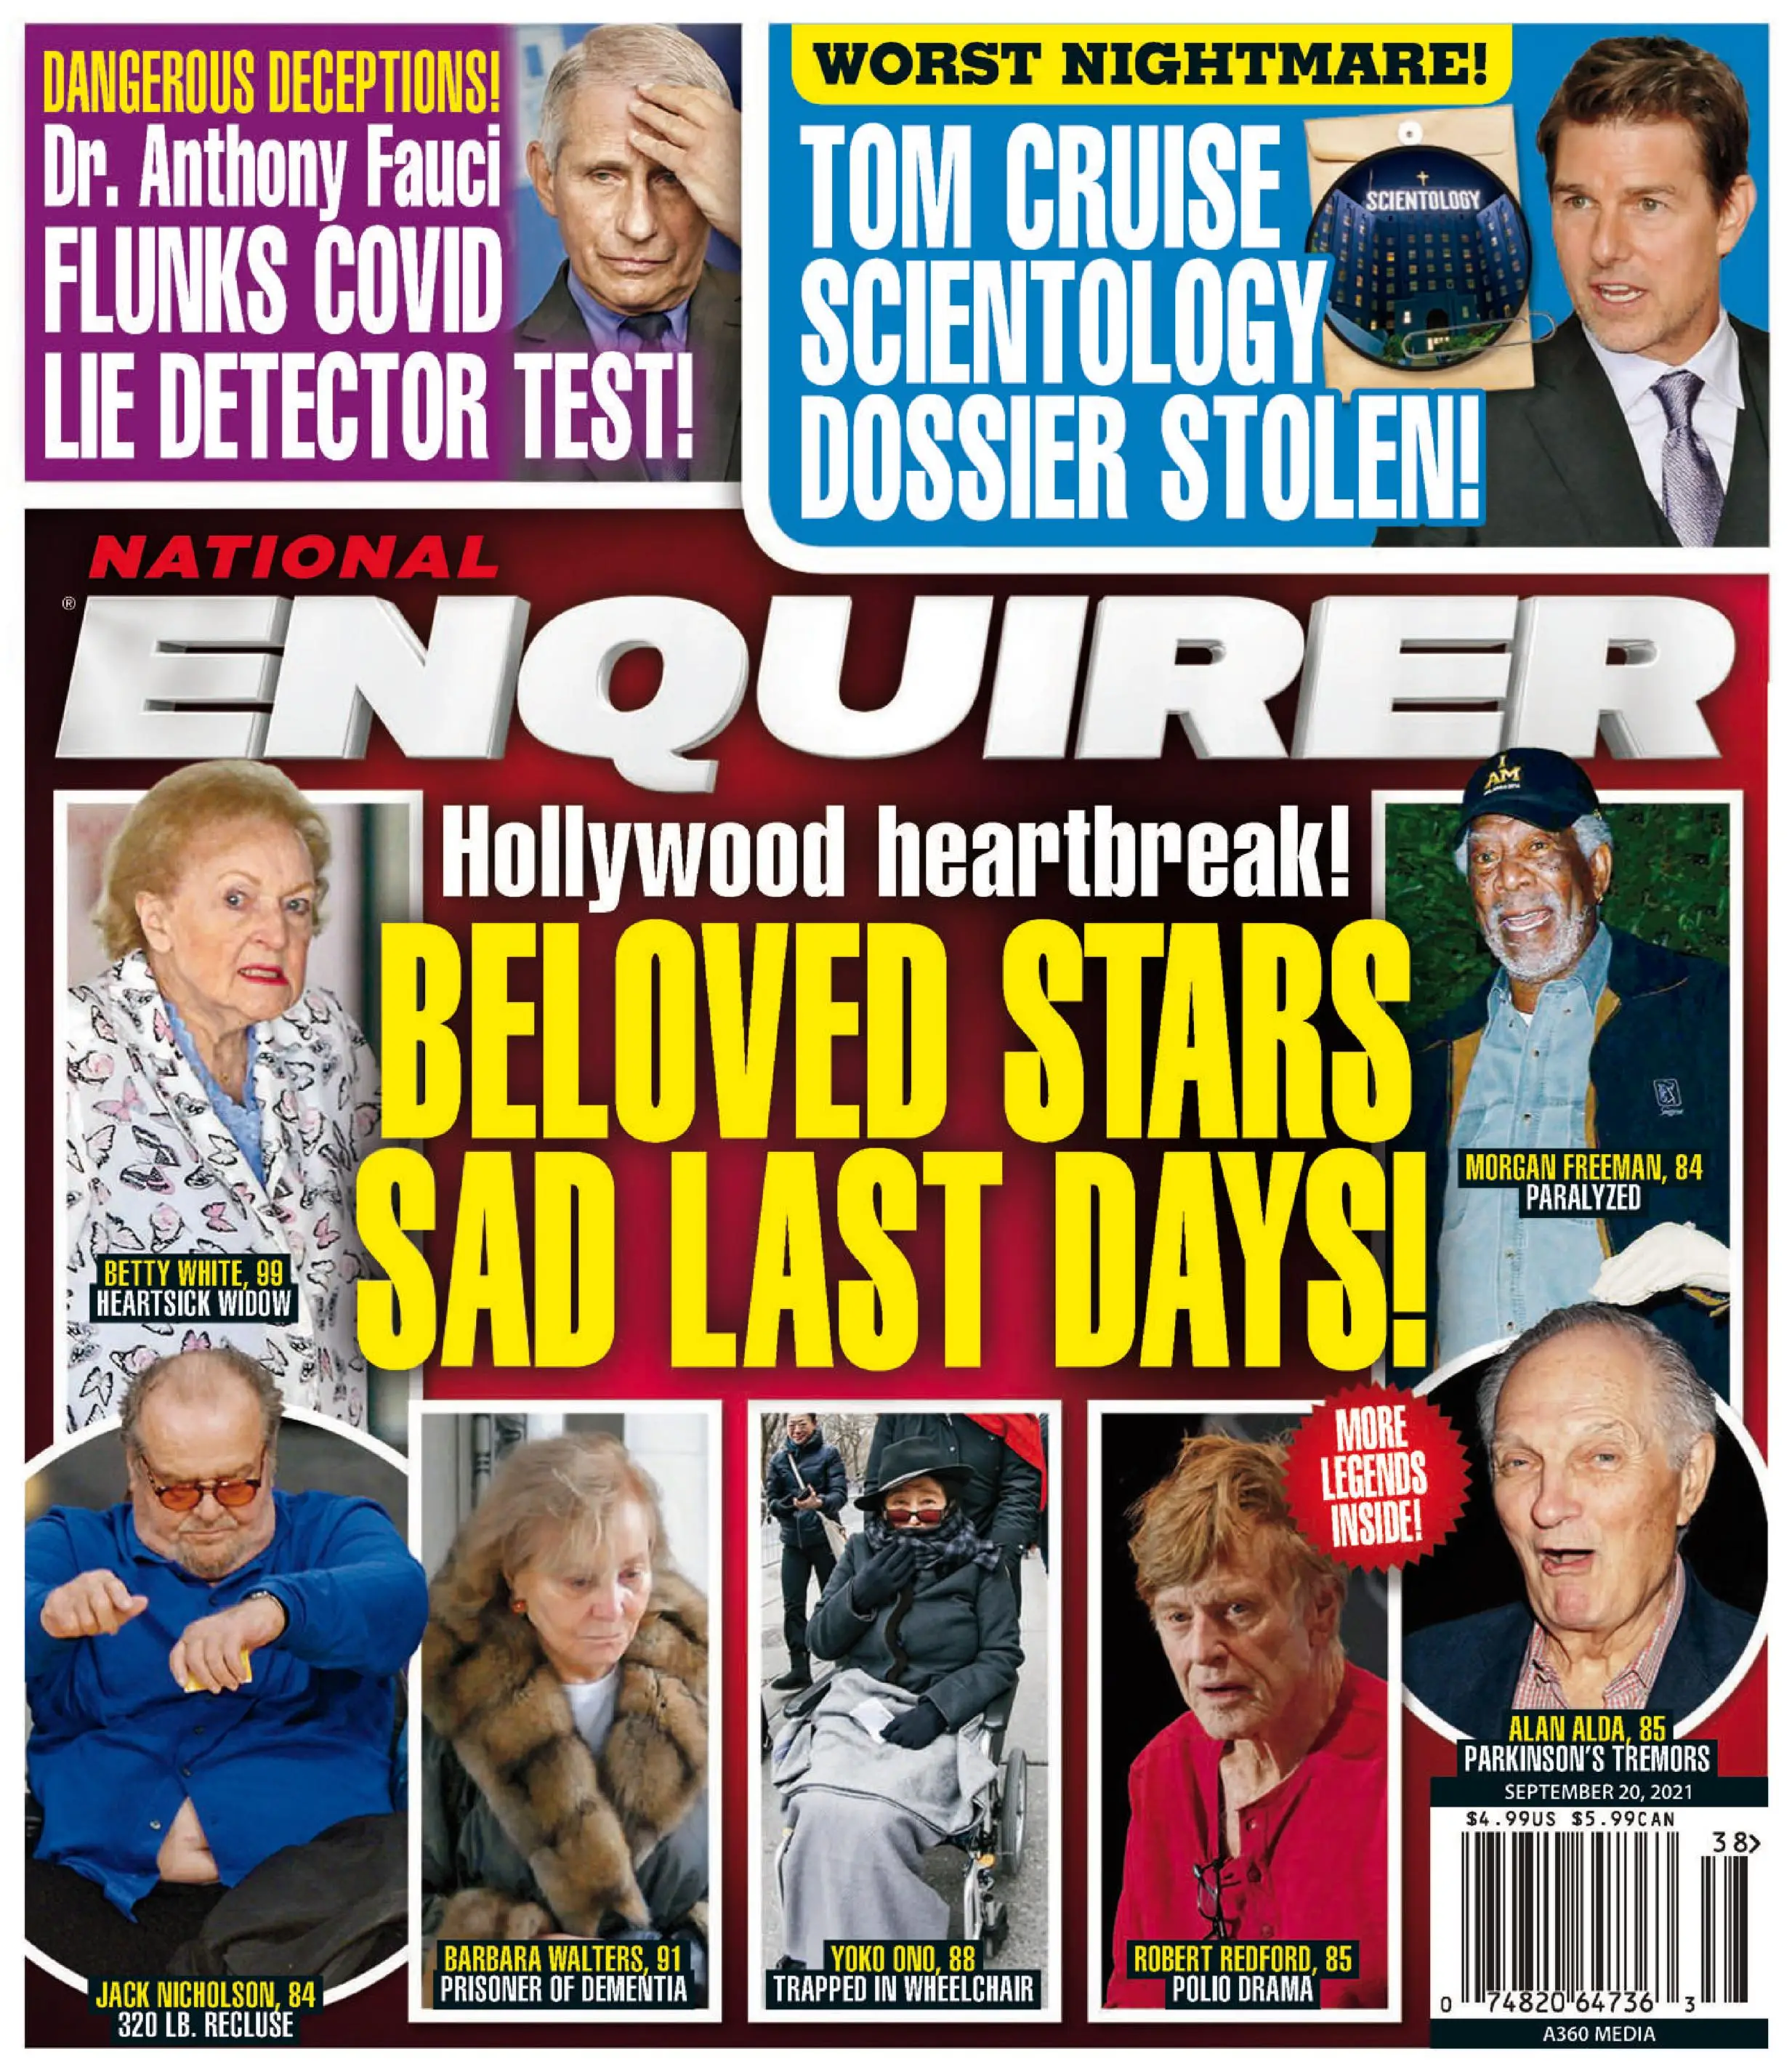 Tom Cruise threatens to sue National Enquirer | The Star